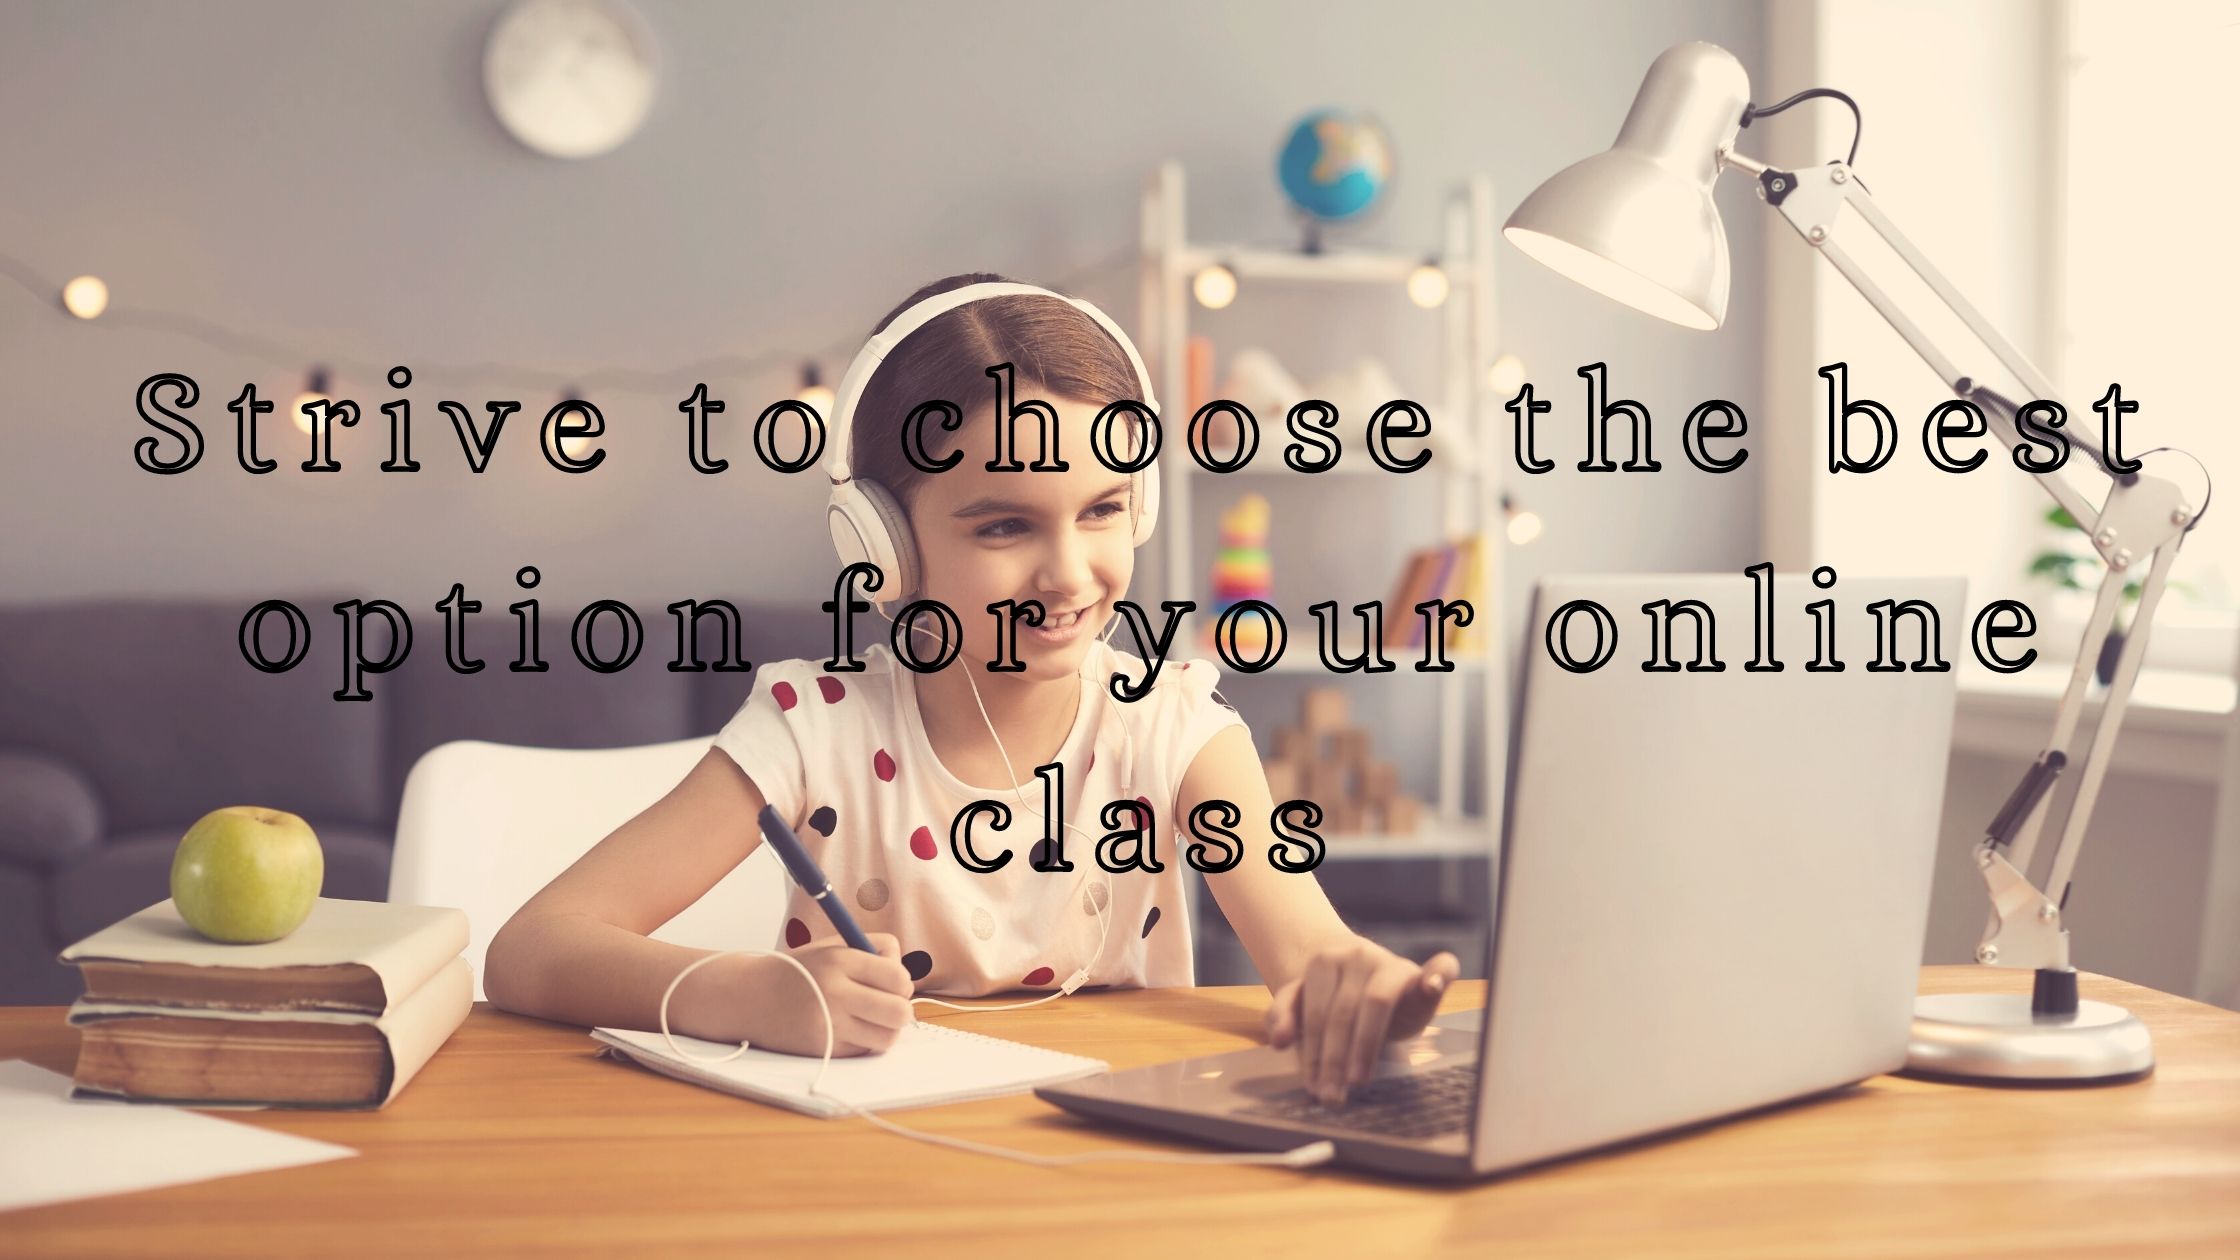 Strive to choose the best option for your online class